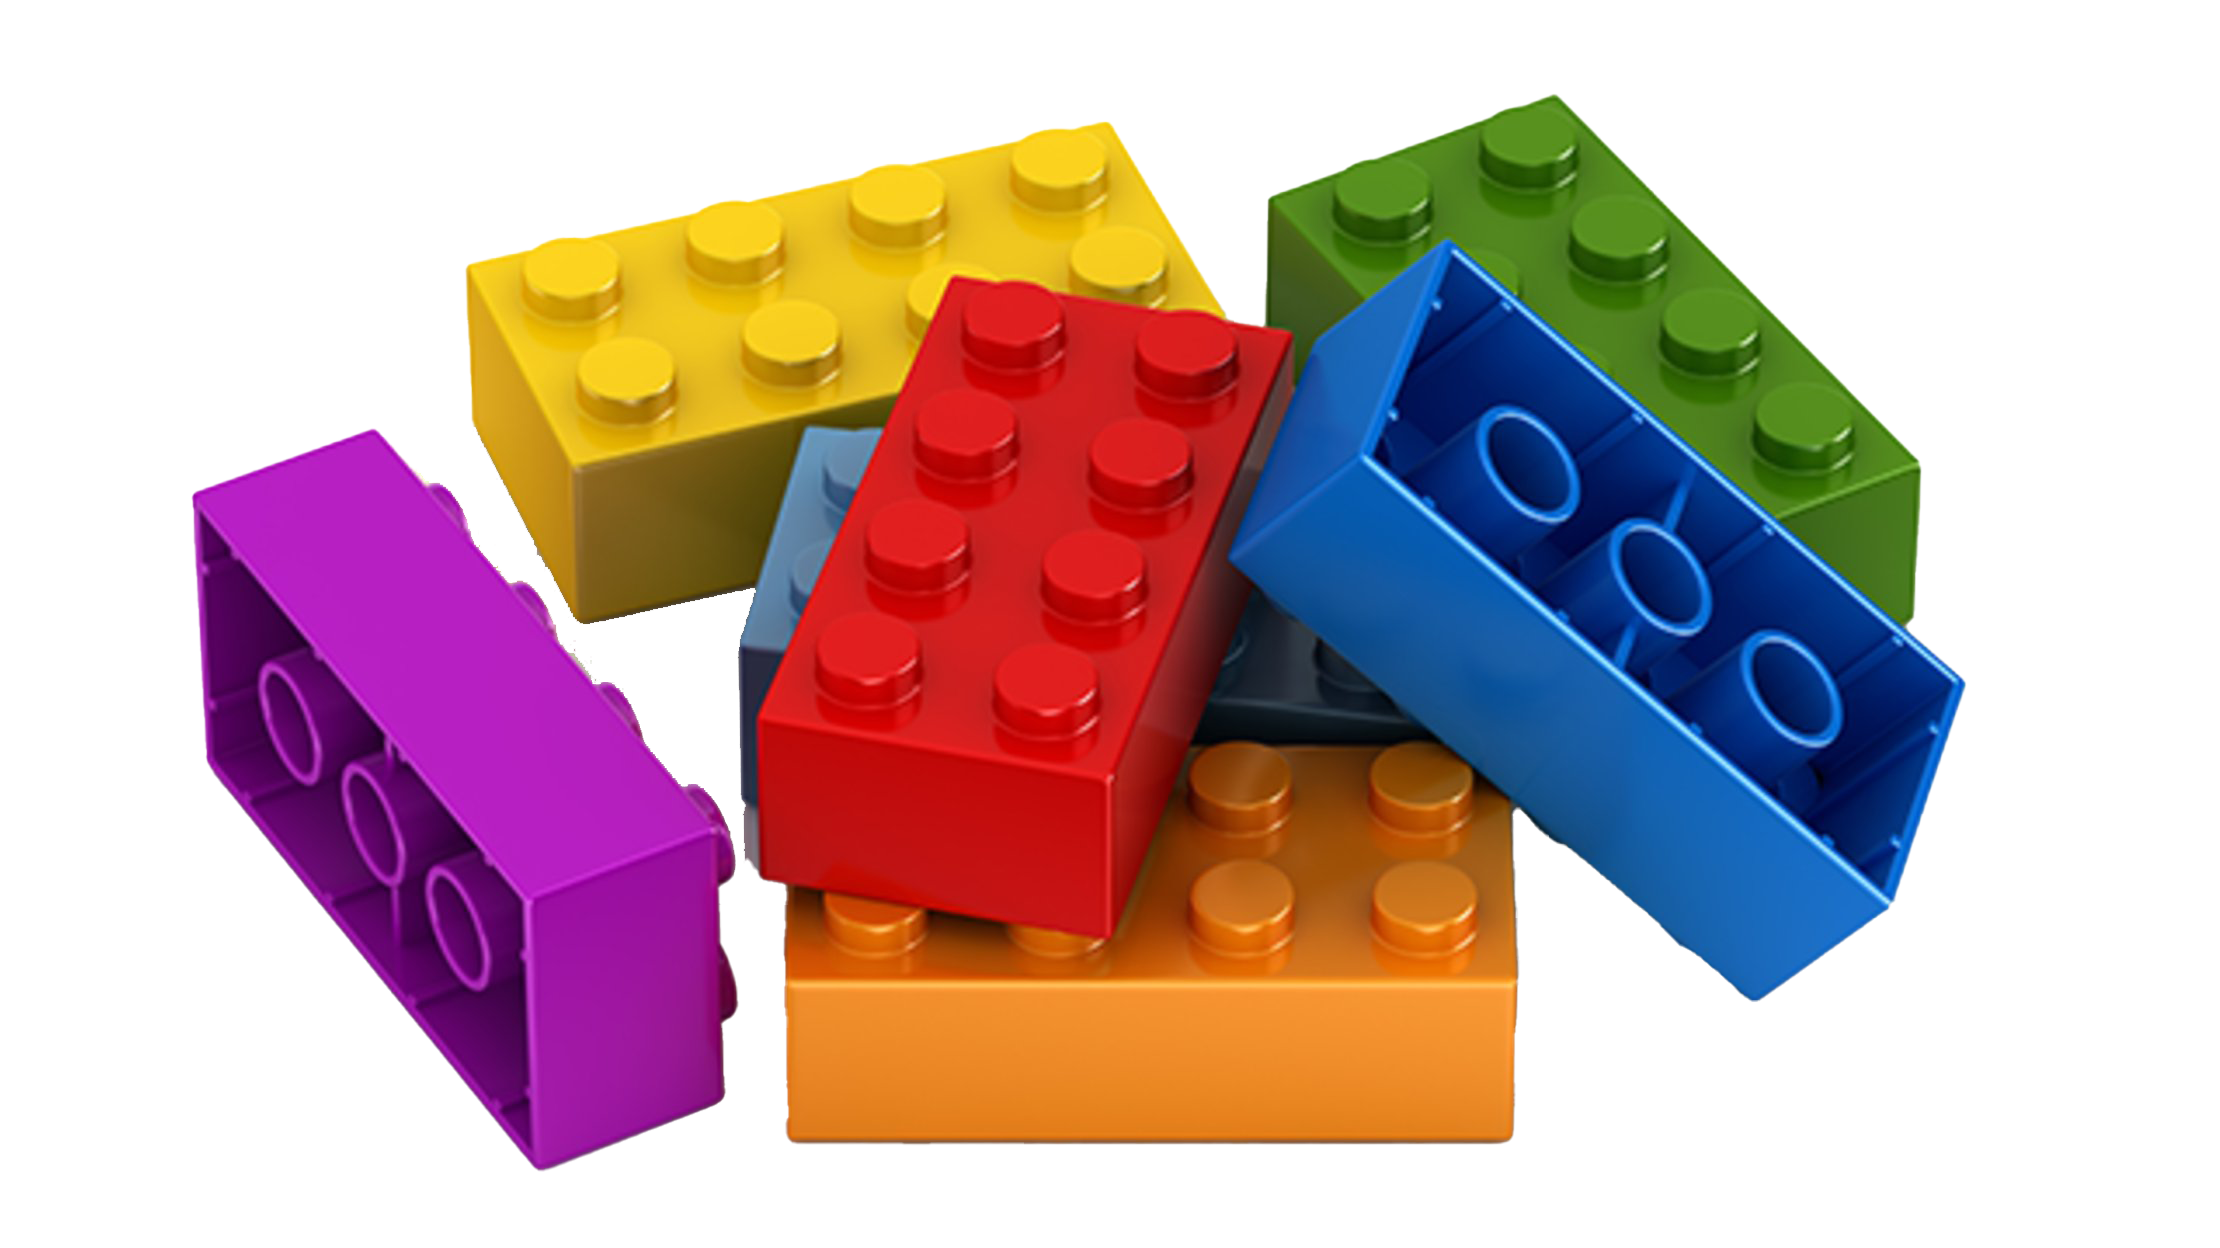 Lego PNG Transparent Images - PNG All